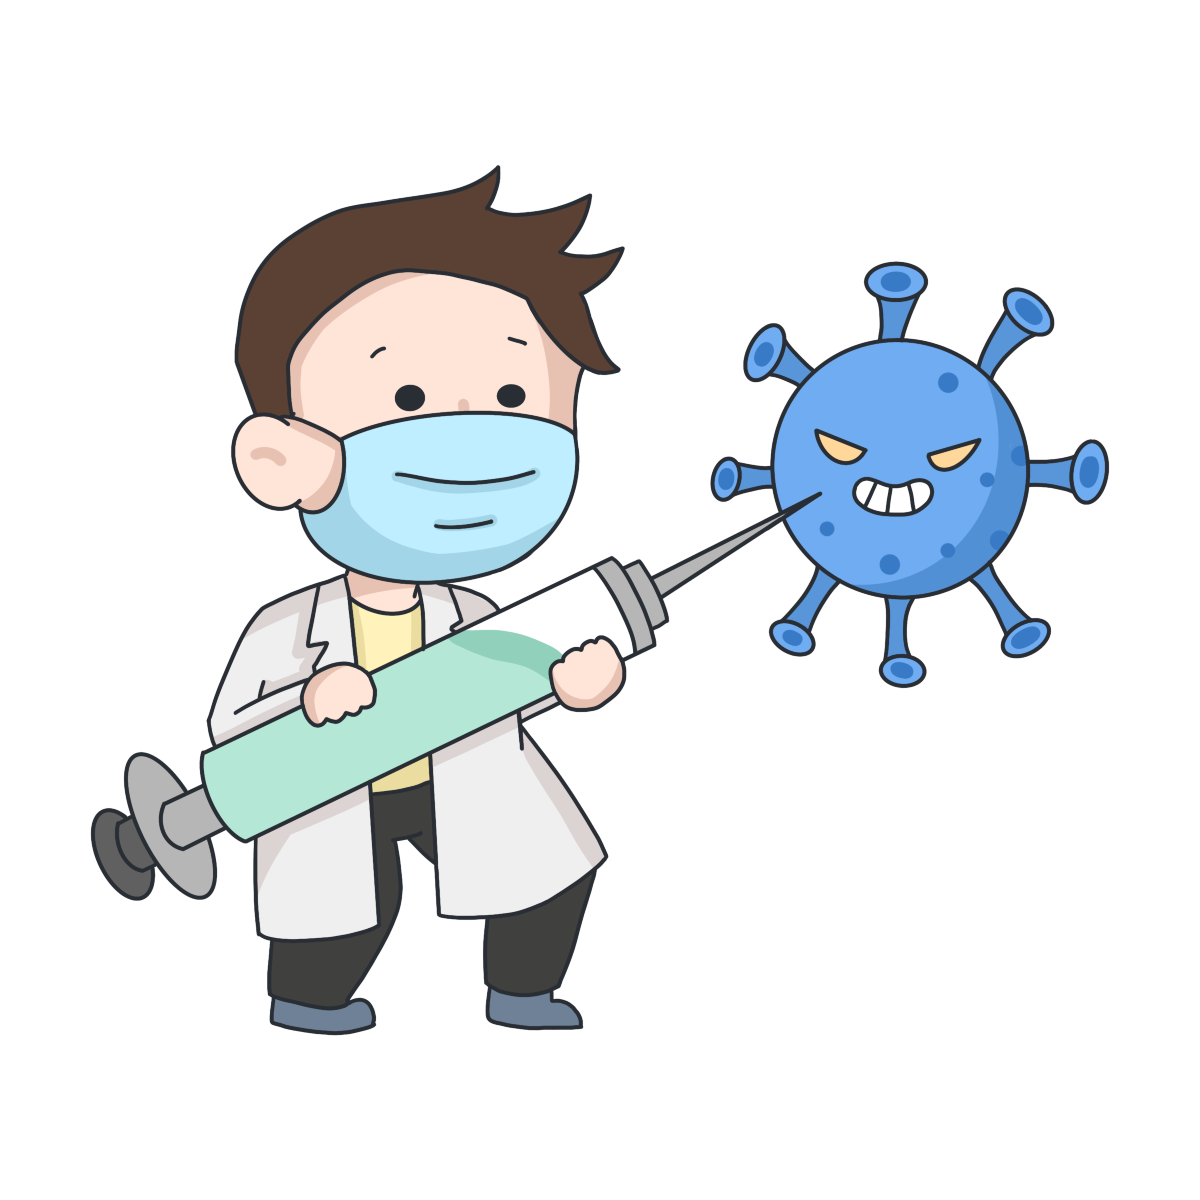 Pngtreedoctor injecting vaccine cartoon illustration 6671122